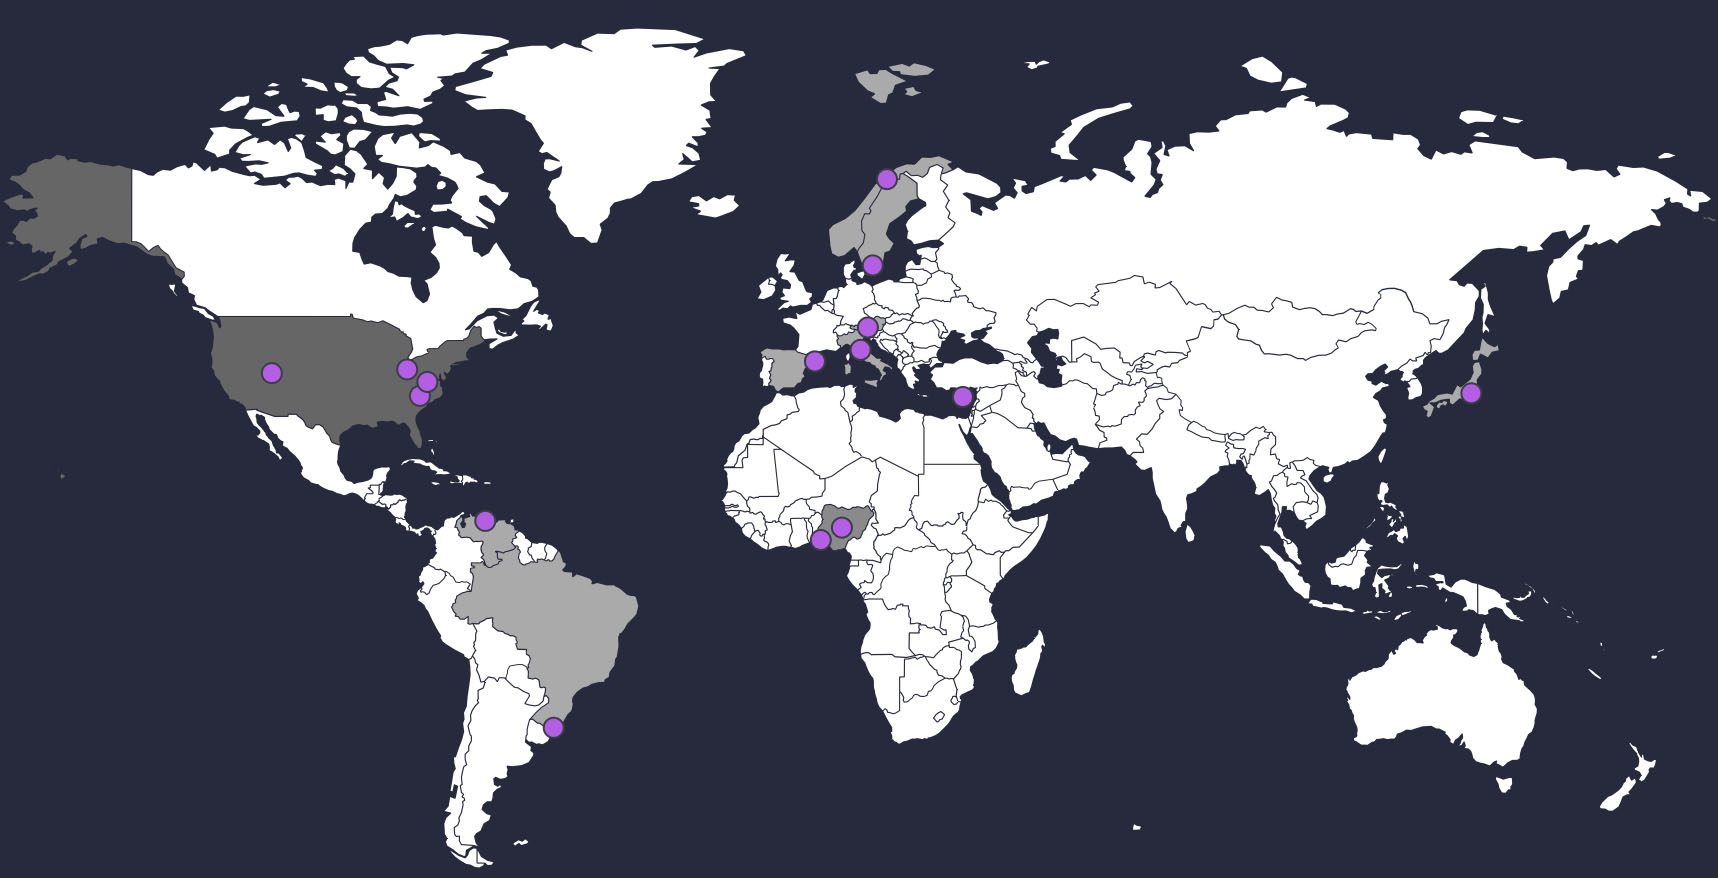 Get to know stake pool operators around the world